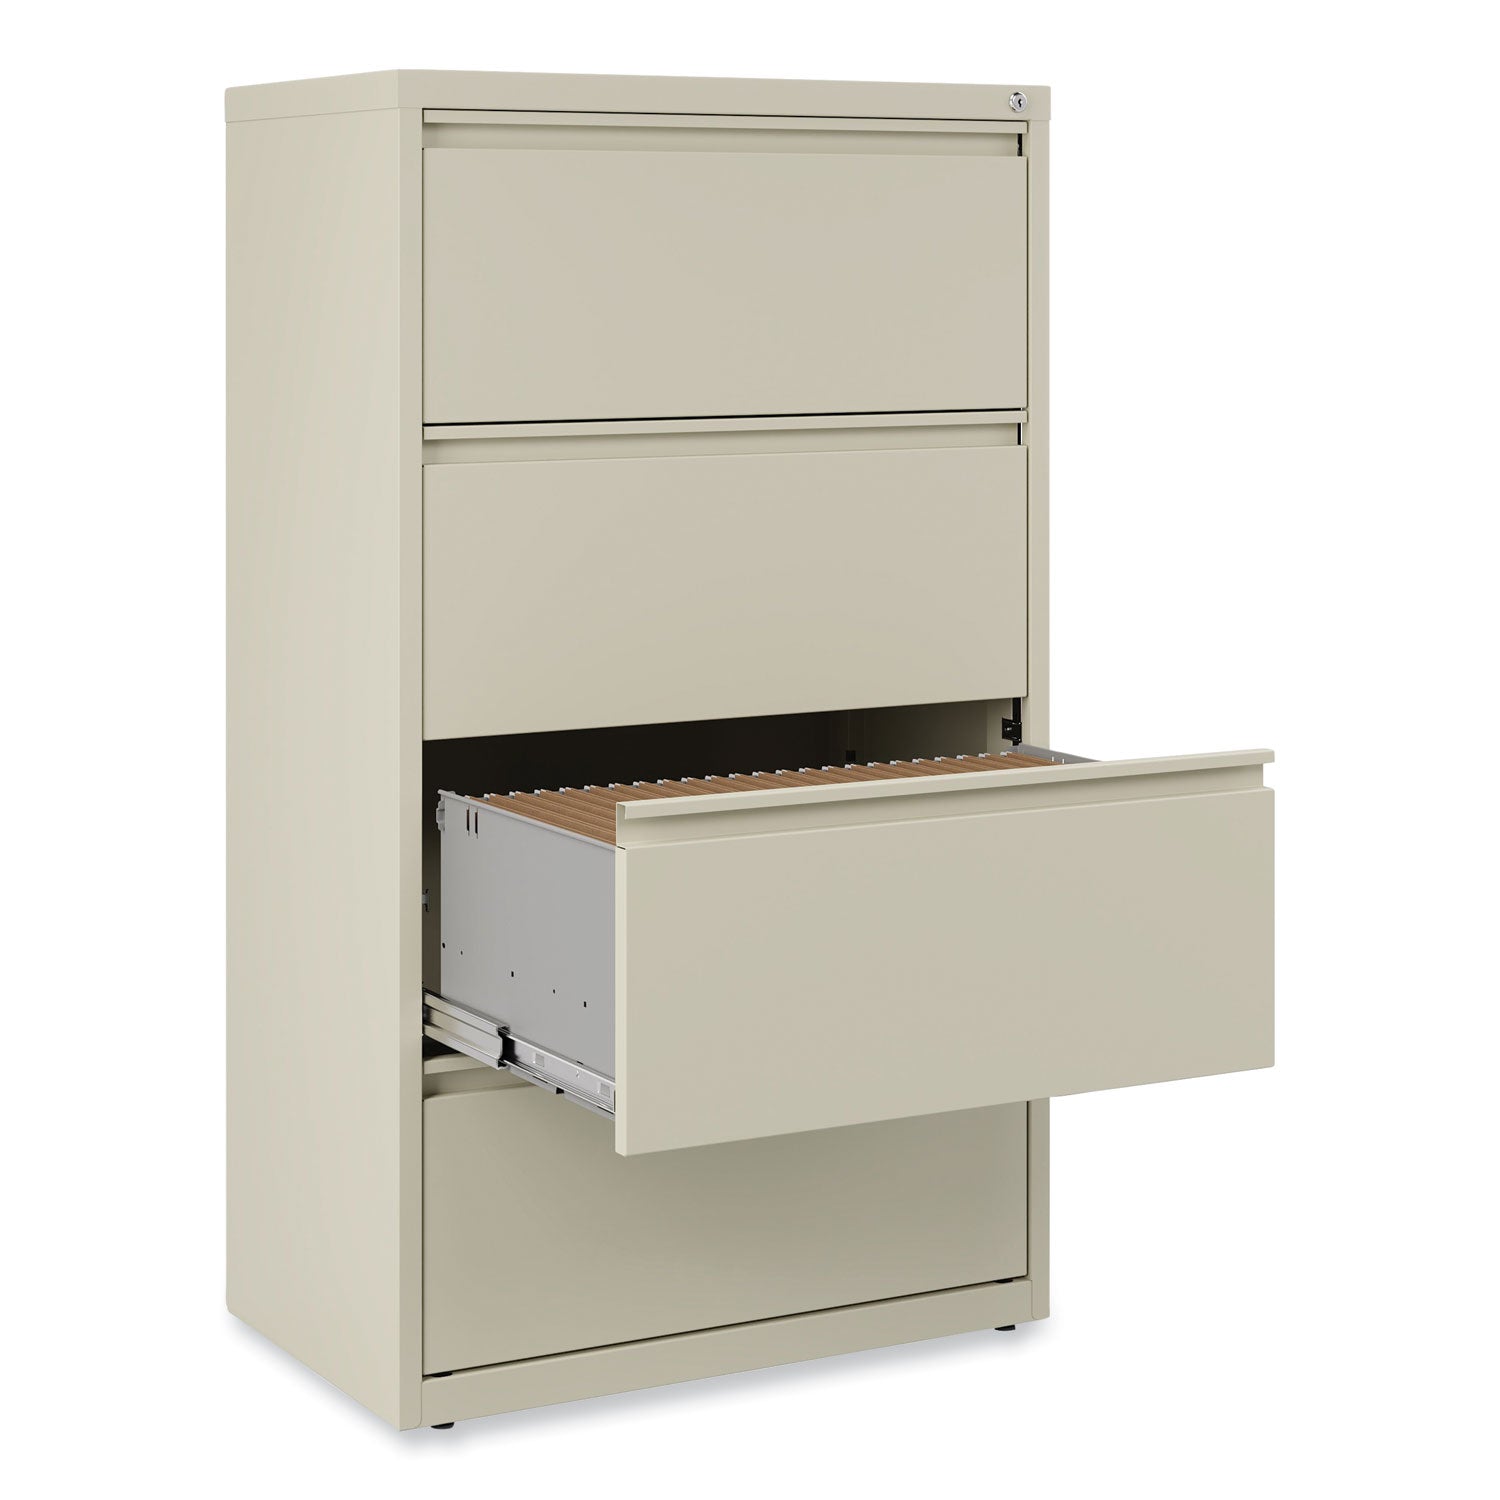 lateral-file-4-legal-letter-size-file-drawers-putty-30-x-1863-x-525_alehlf3054py - 6